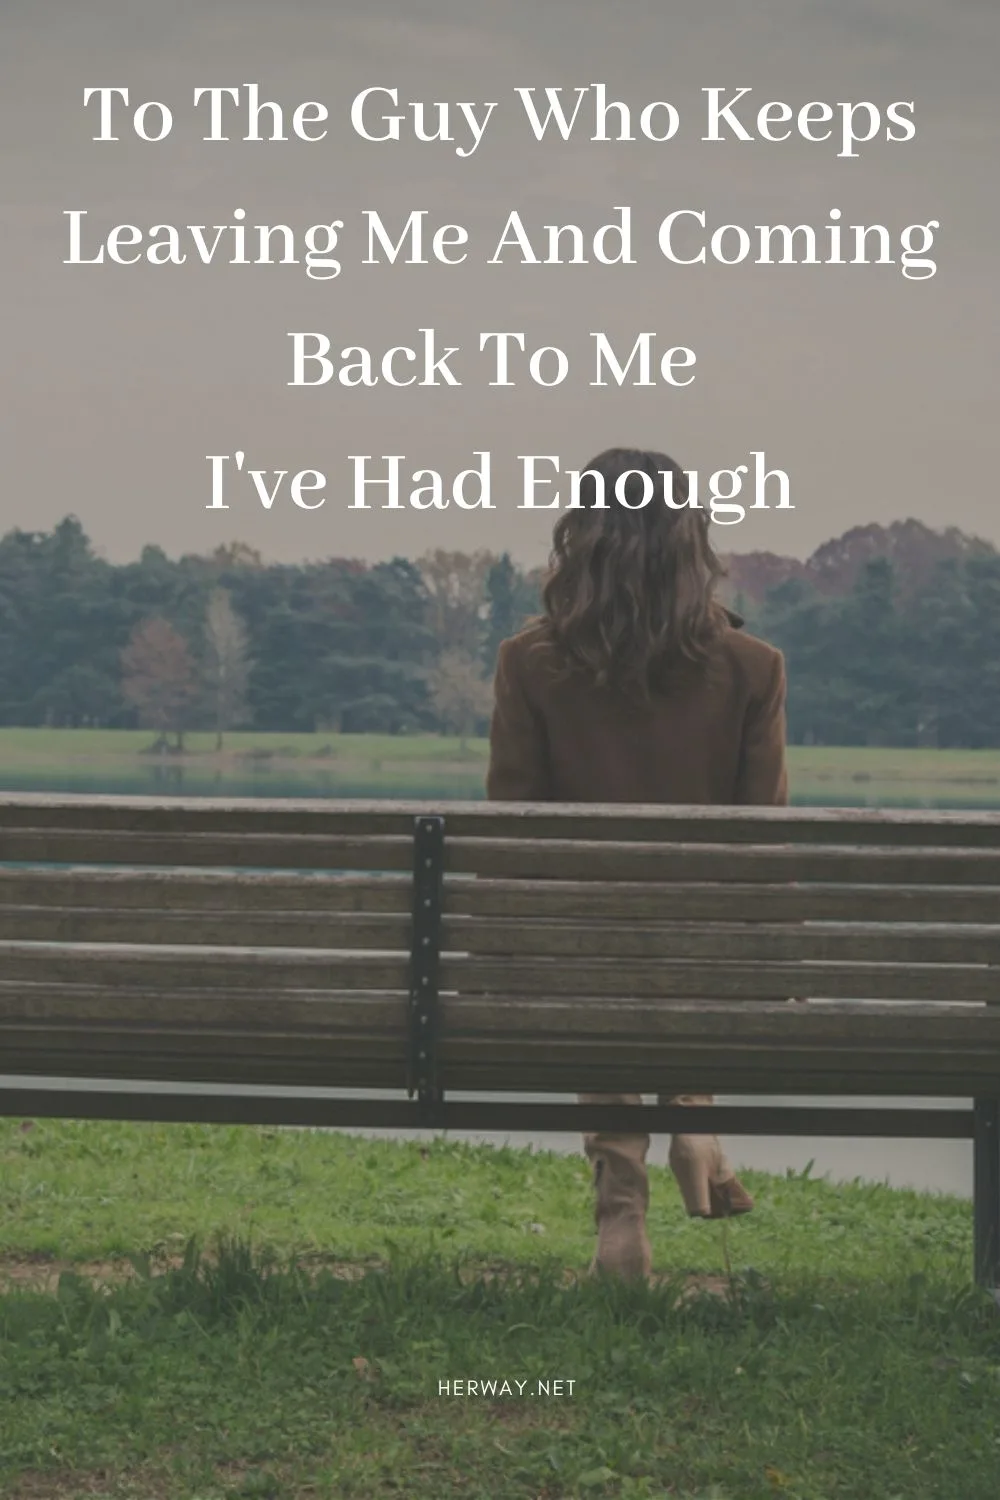 To The Guy Who Keeps Leaving Me And Coming Back To Me I've Had Enough